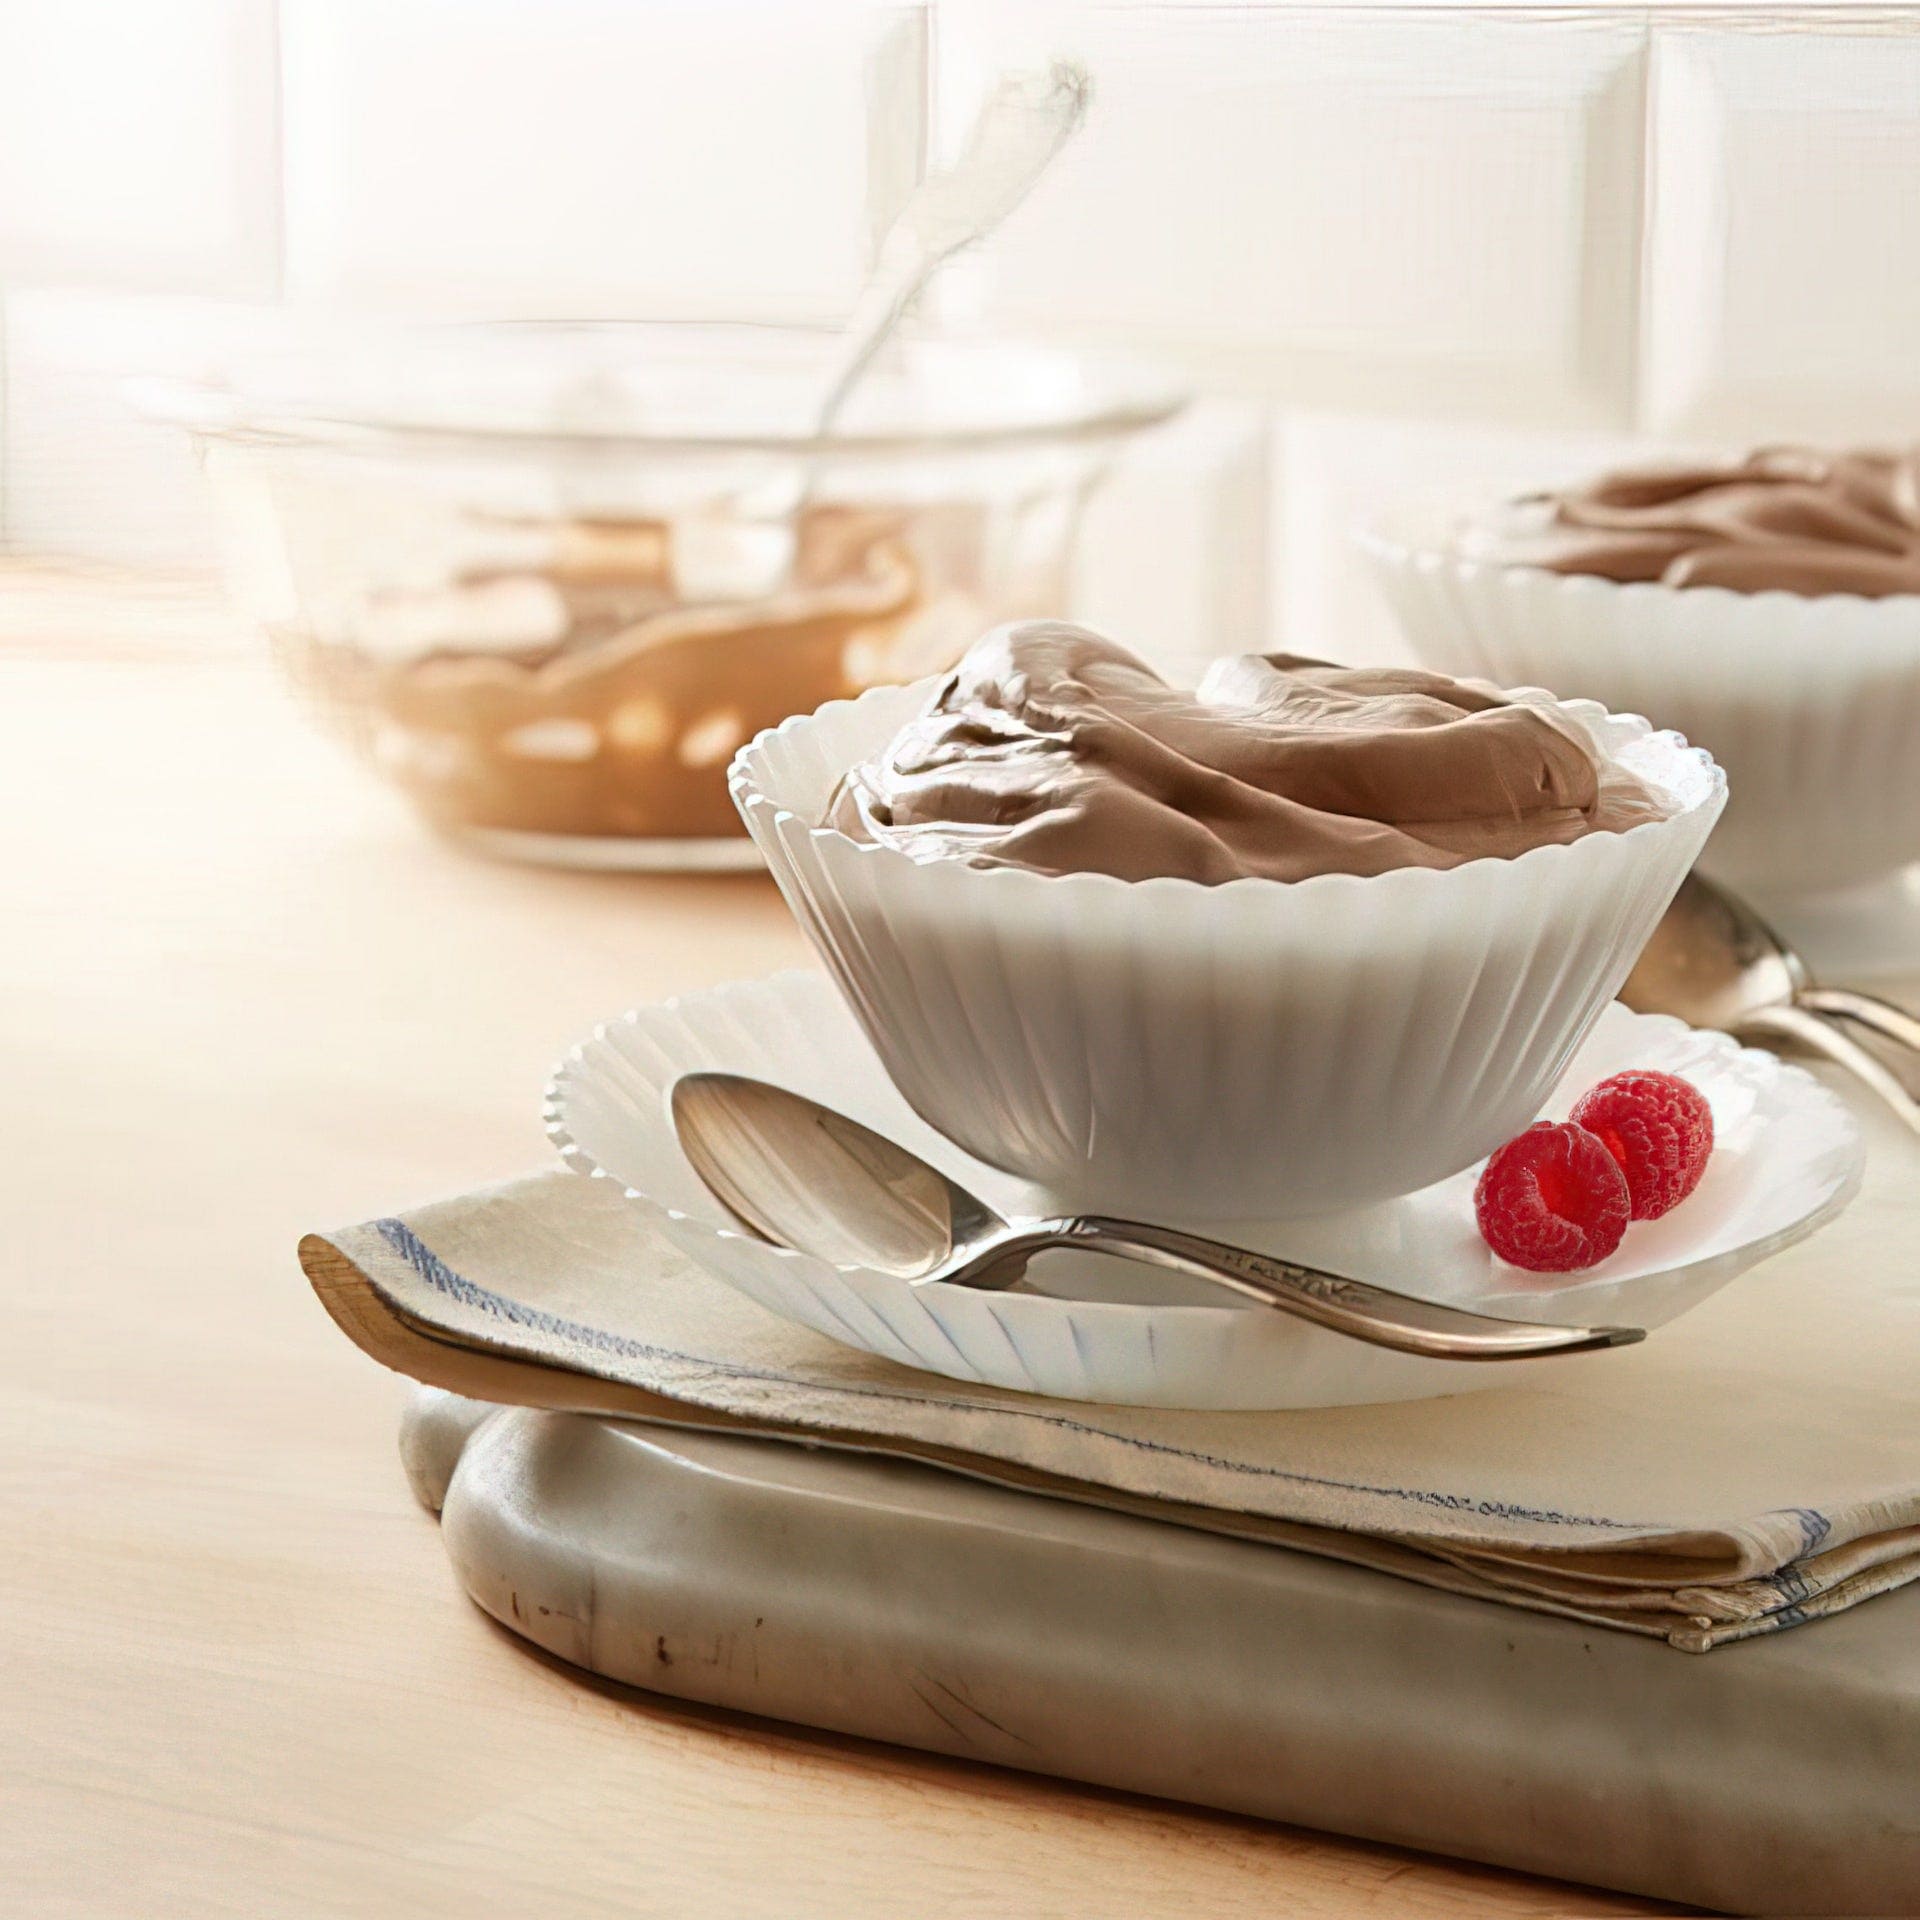 HERSHEY'S SIMPLY 5 Chocolate Syrup Mousse